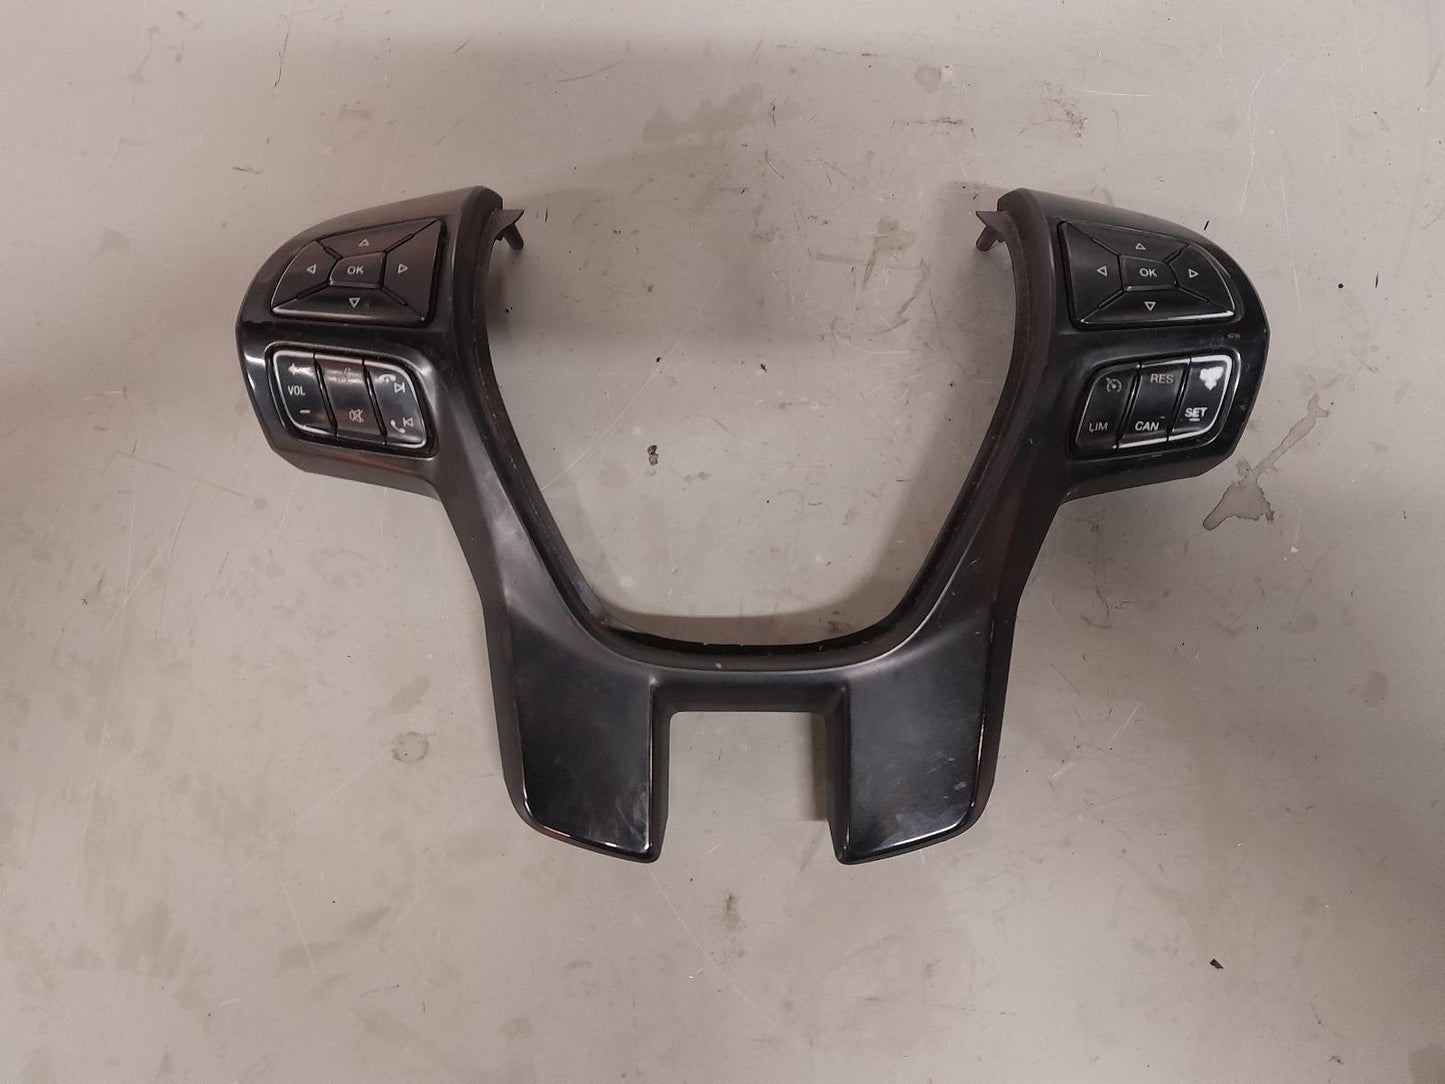 Ford Ranger Steering Wheel Switches